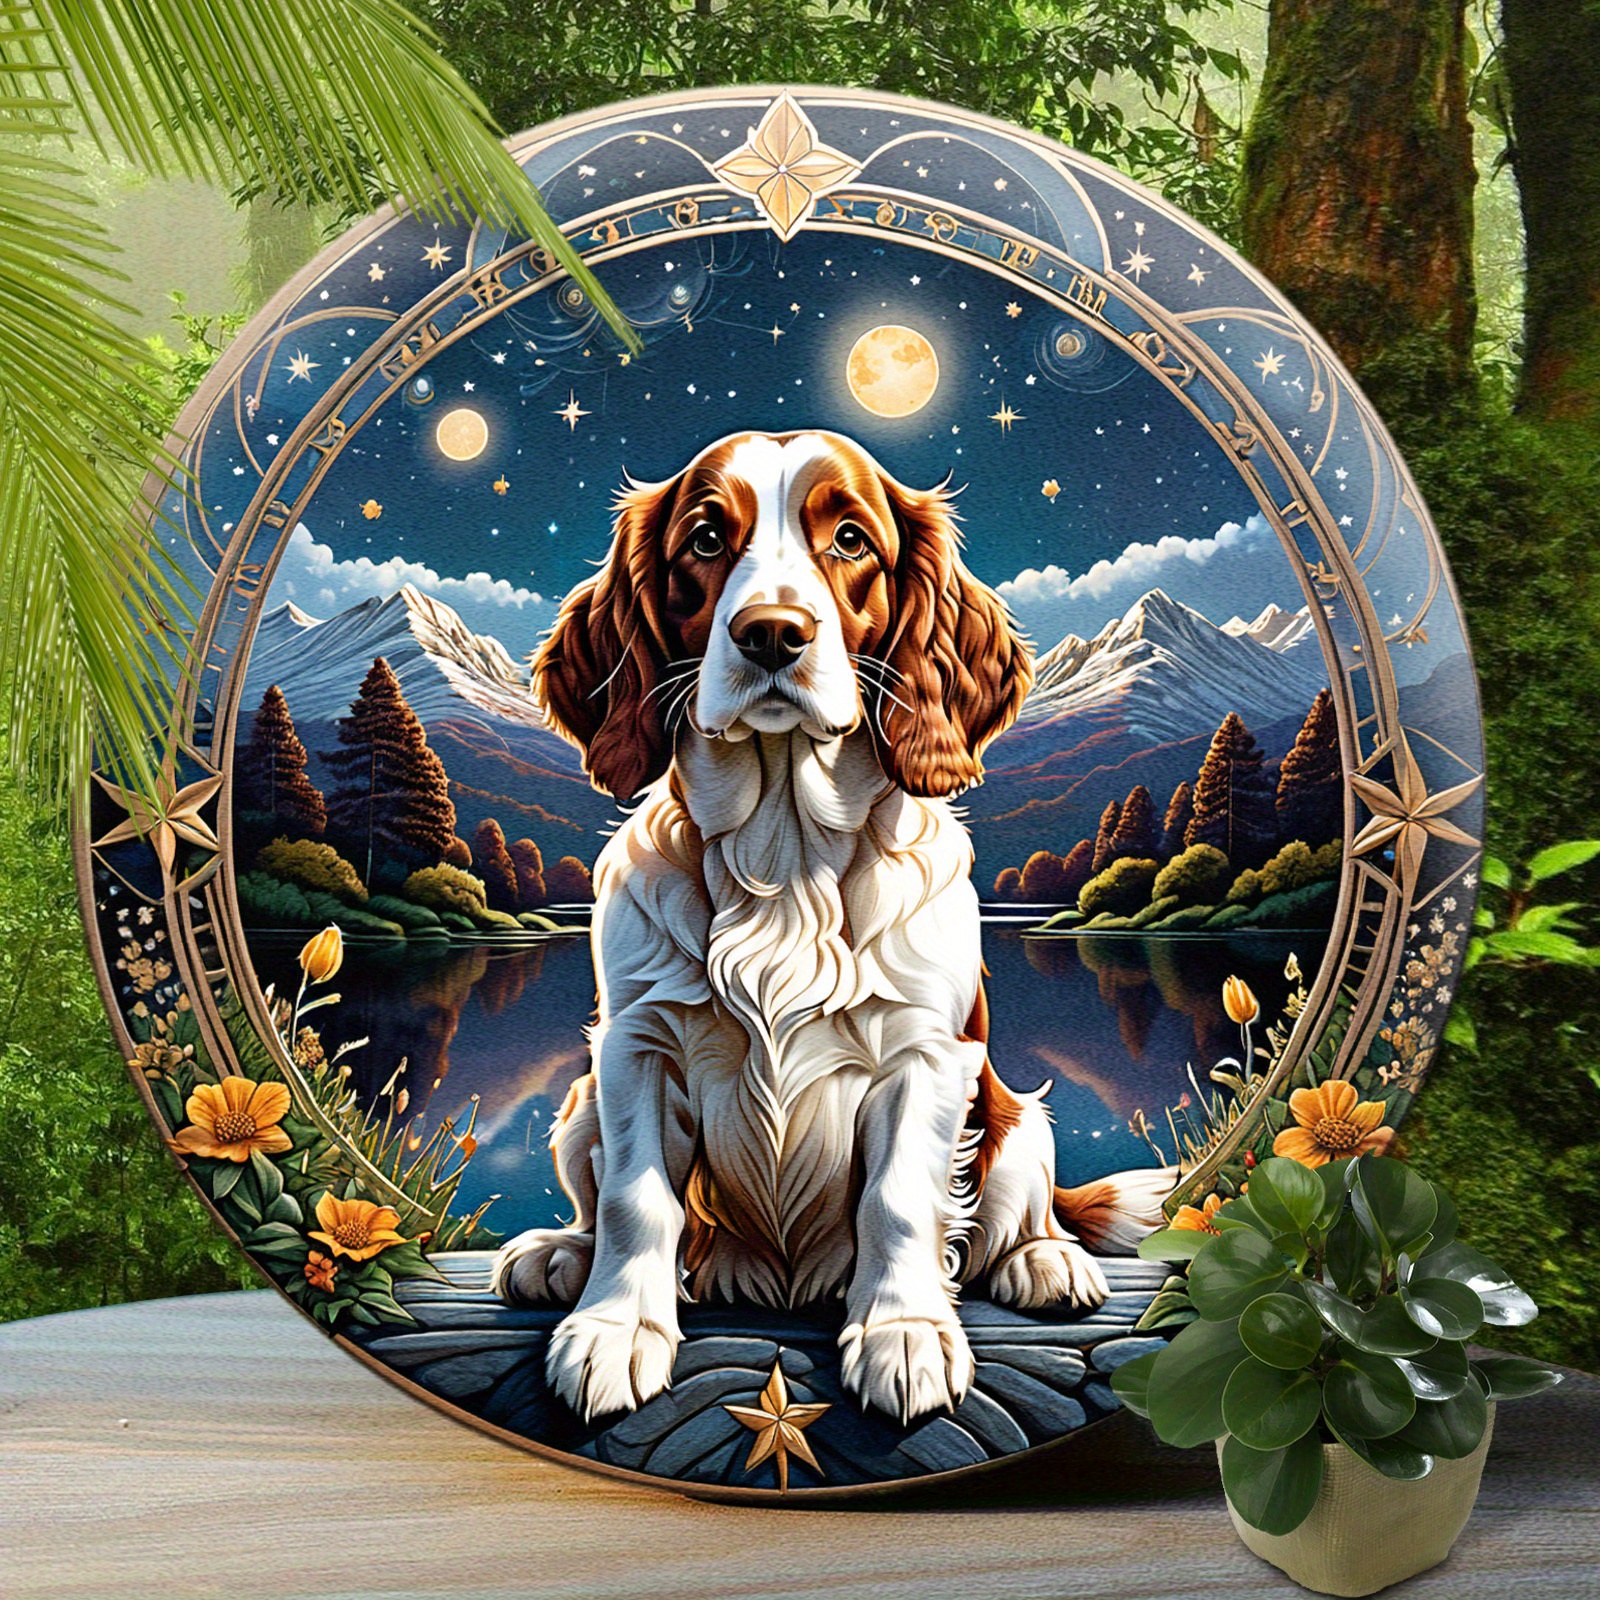 

1pc 8x8 Inch (20x20cm) Round Aluminum Sign Welsh Springer Spaniel Vintage Round Aluminum Sign, Cute Dog Sign For Cafe Kitchen Club Bar Home Wall Art & Decor Gift